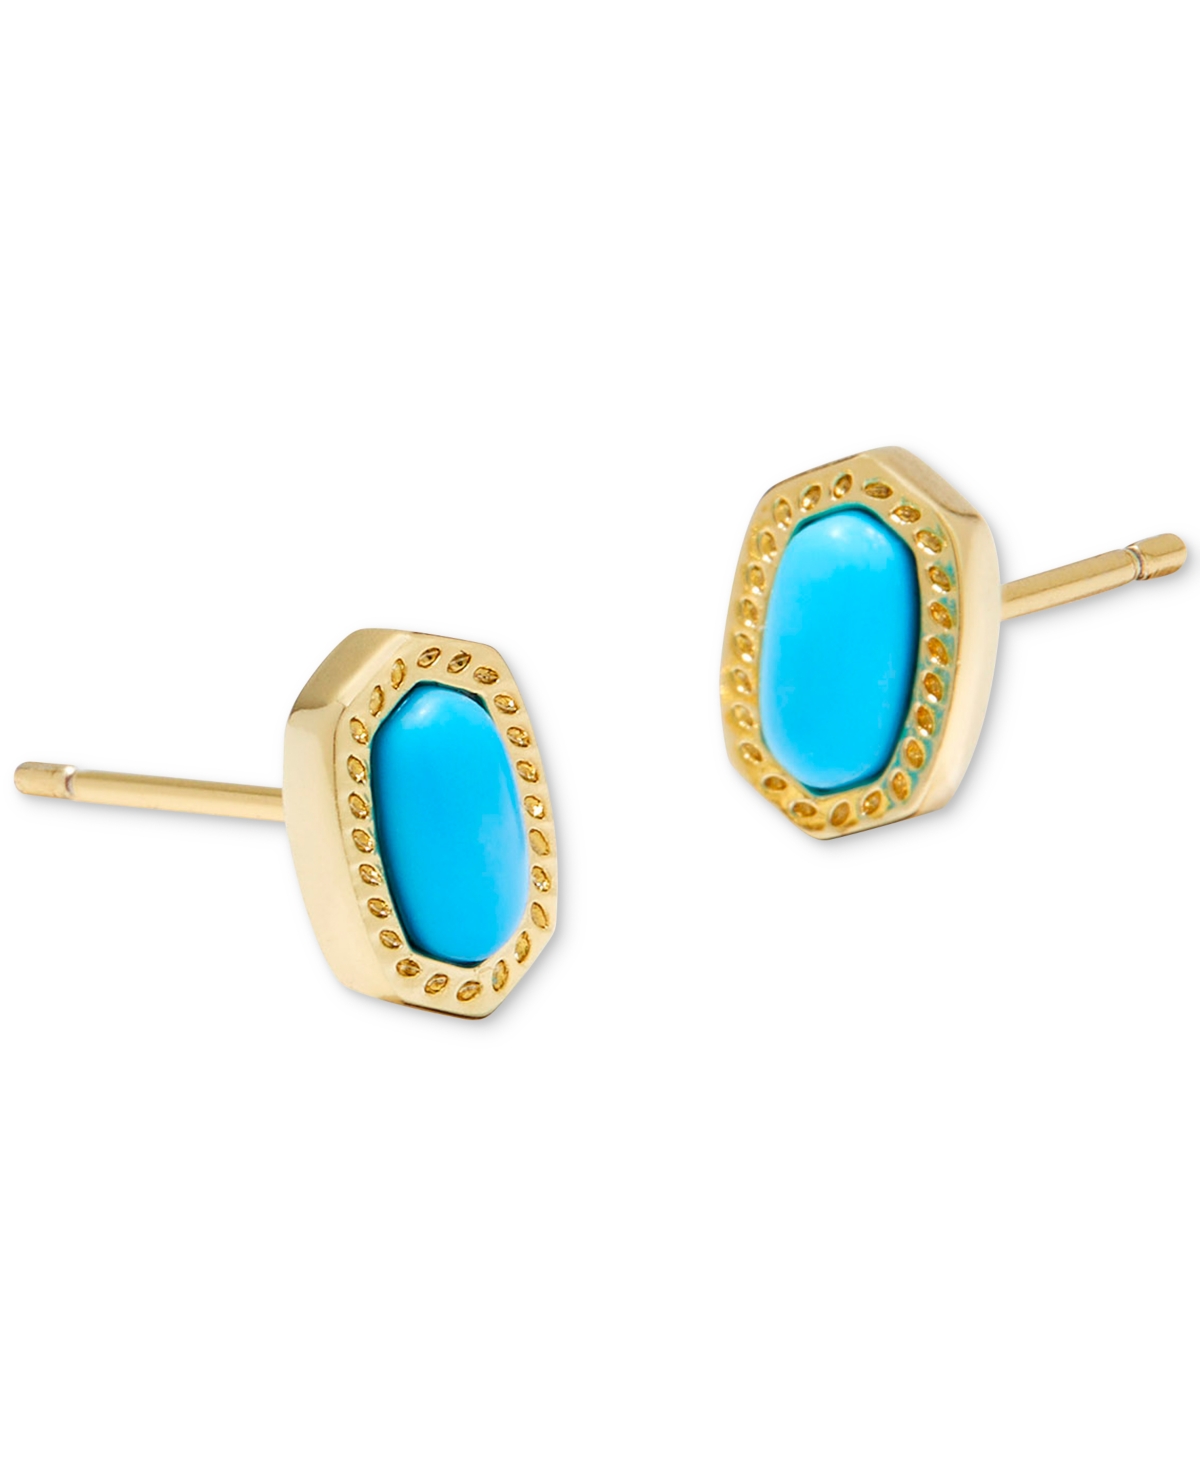 14k Gold-Plated Oval Stone Stud Earrings - Pink Opalite Crystal